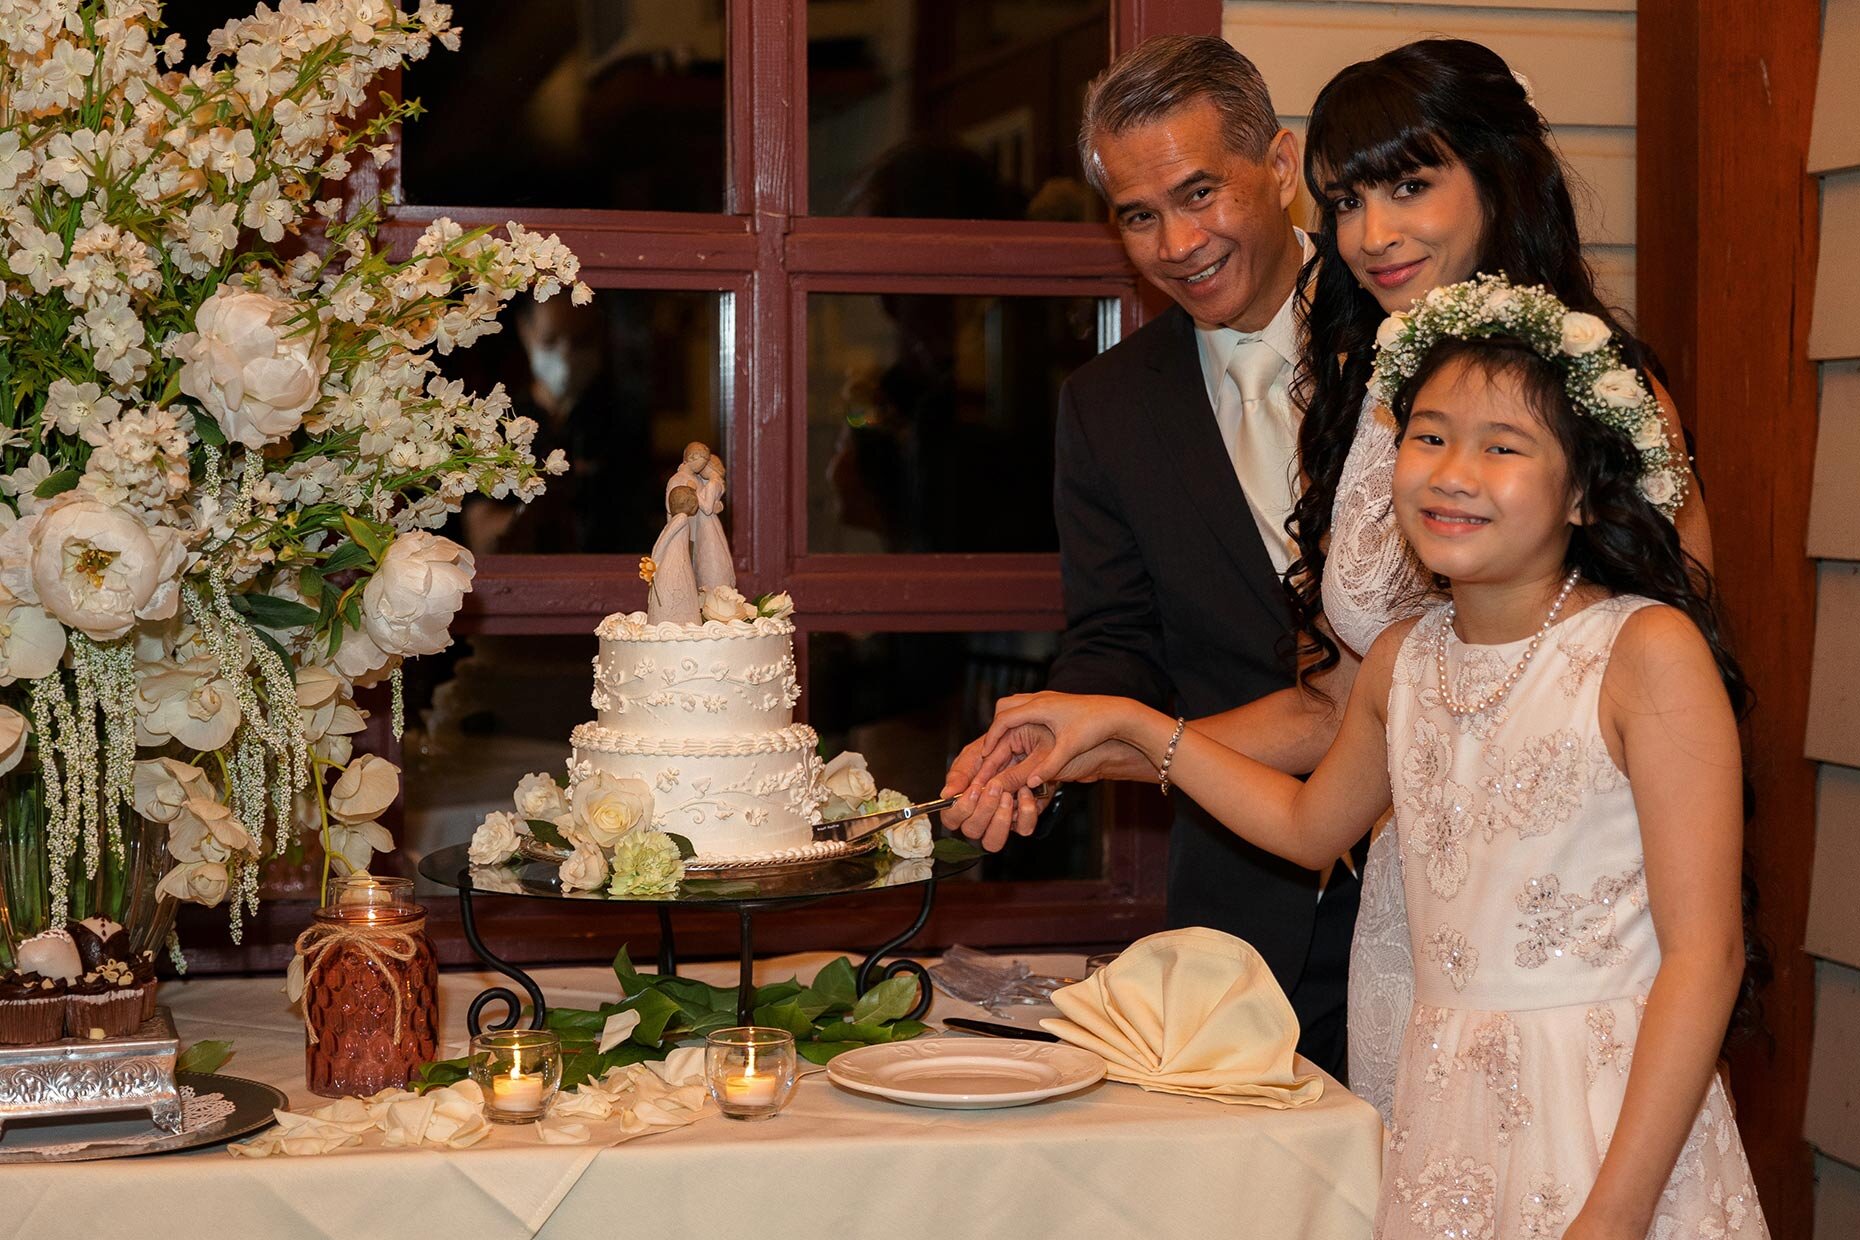 Cutting the cake as a family